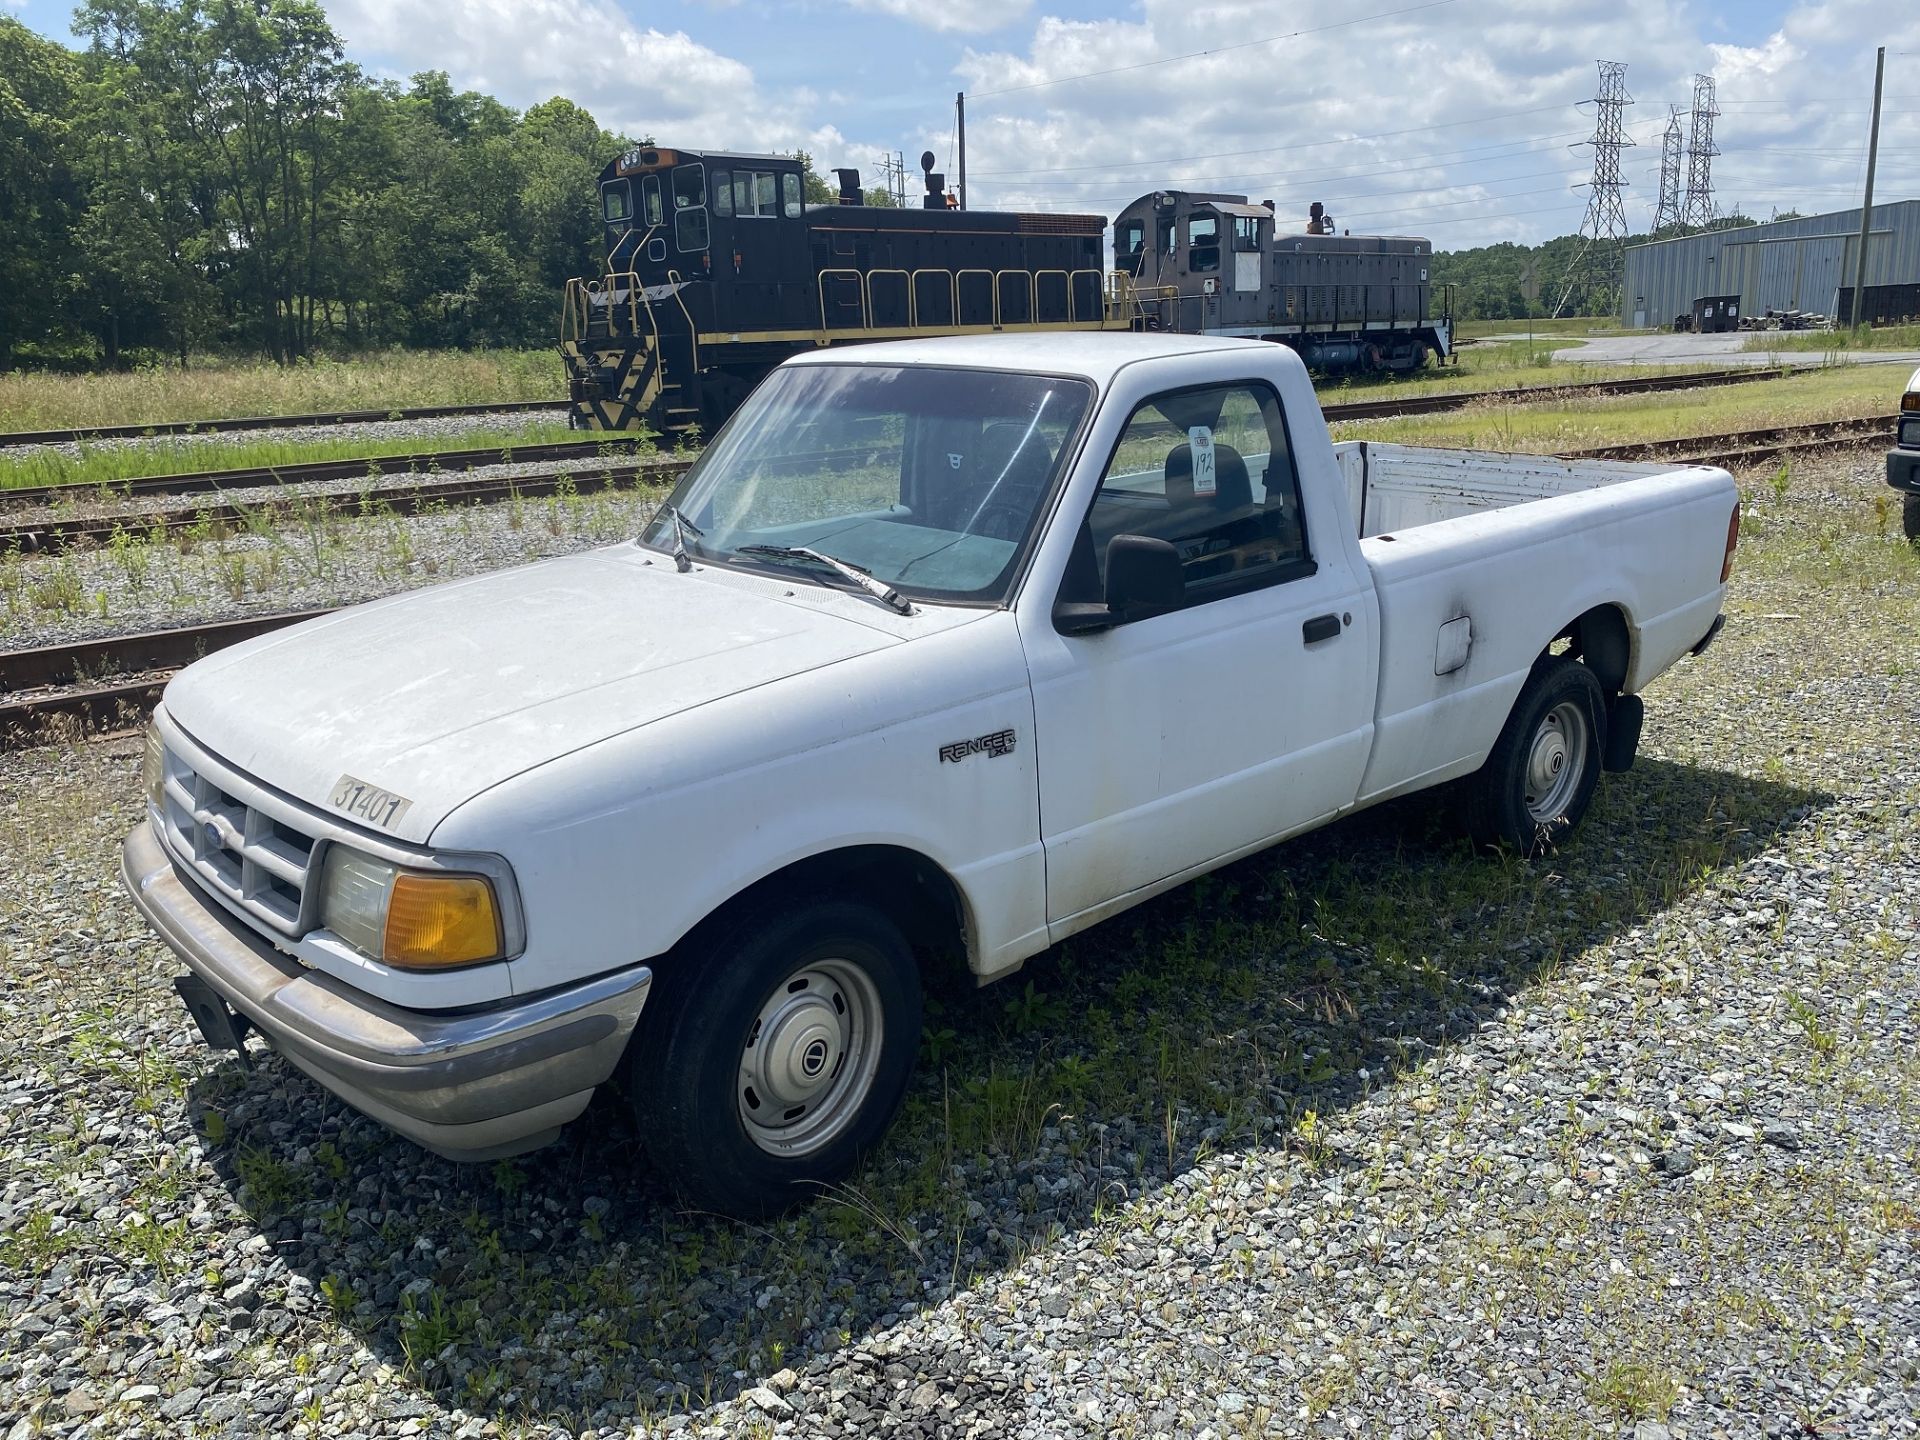 1992 FORD RANGER XL, 72,839 MILES, VIN: 1FTCR10A0PUB06436, W/ TITLE (LOCATION: CY ROAD)